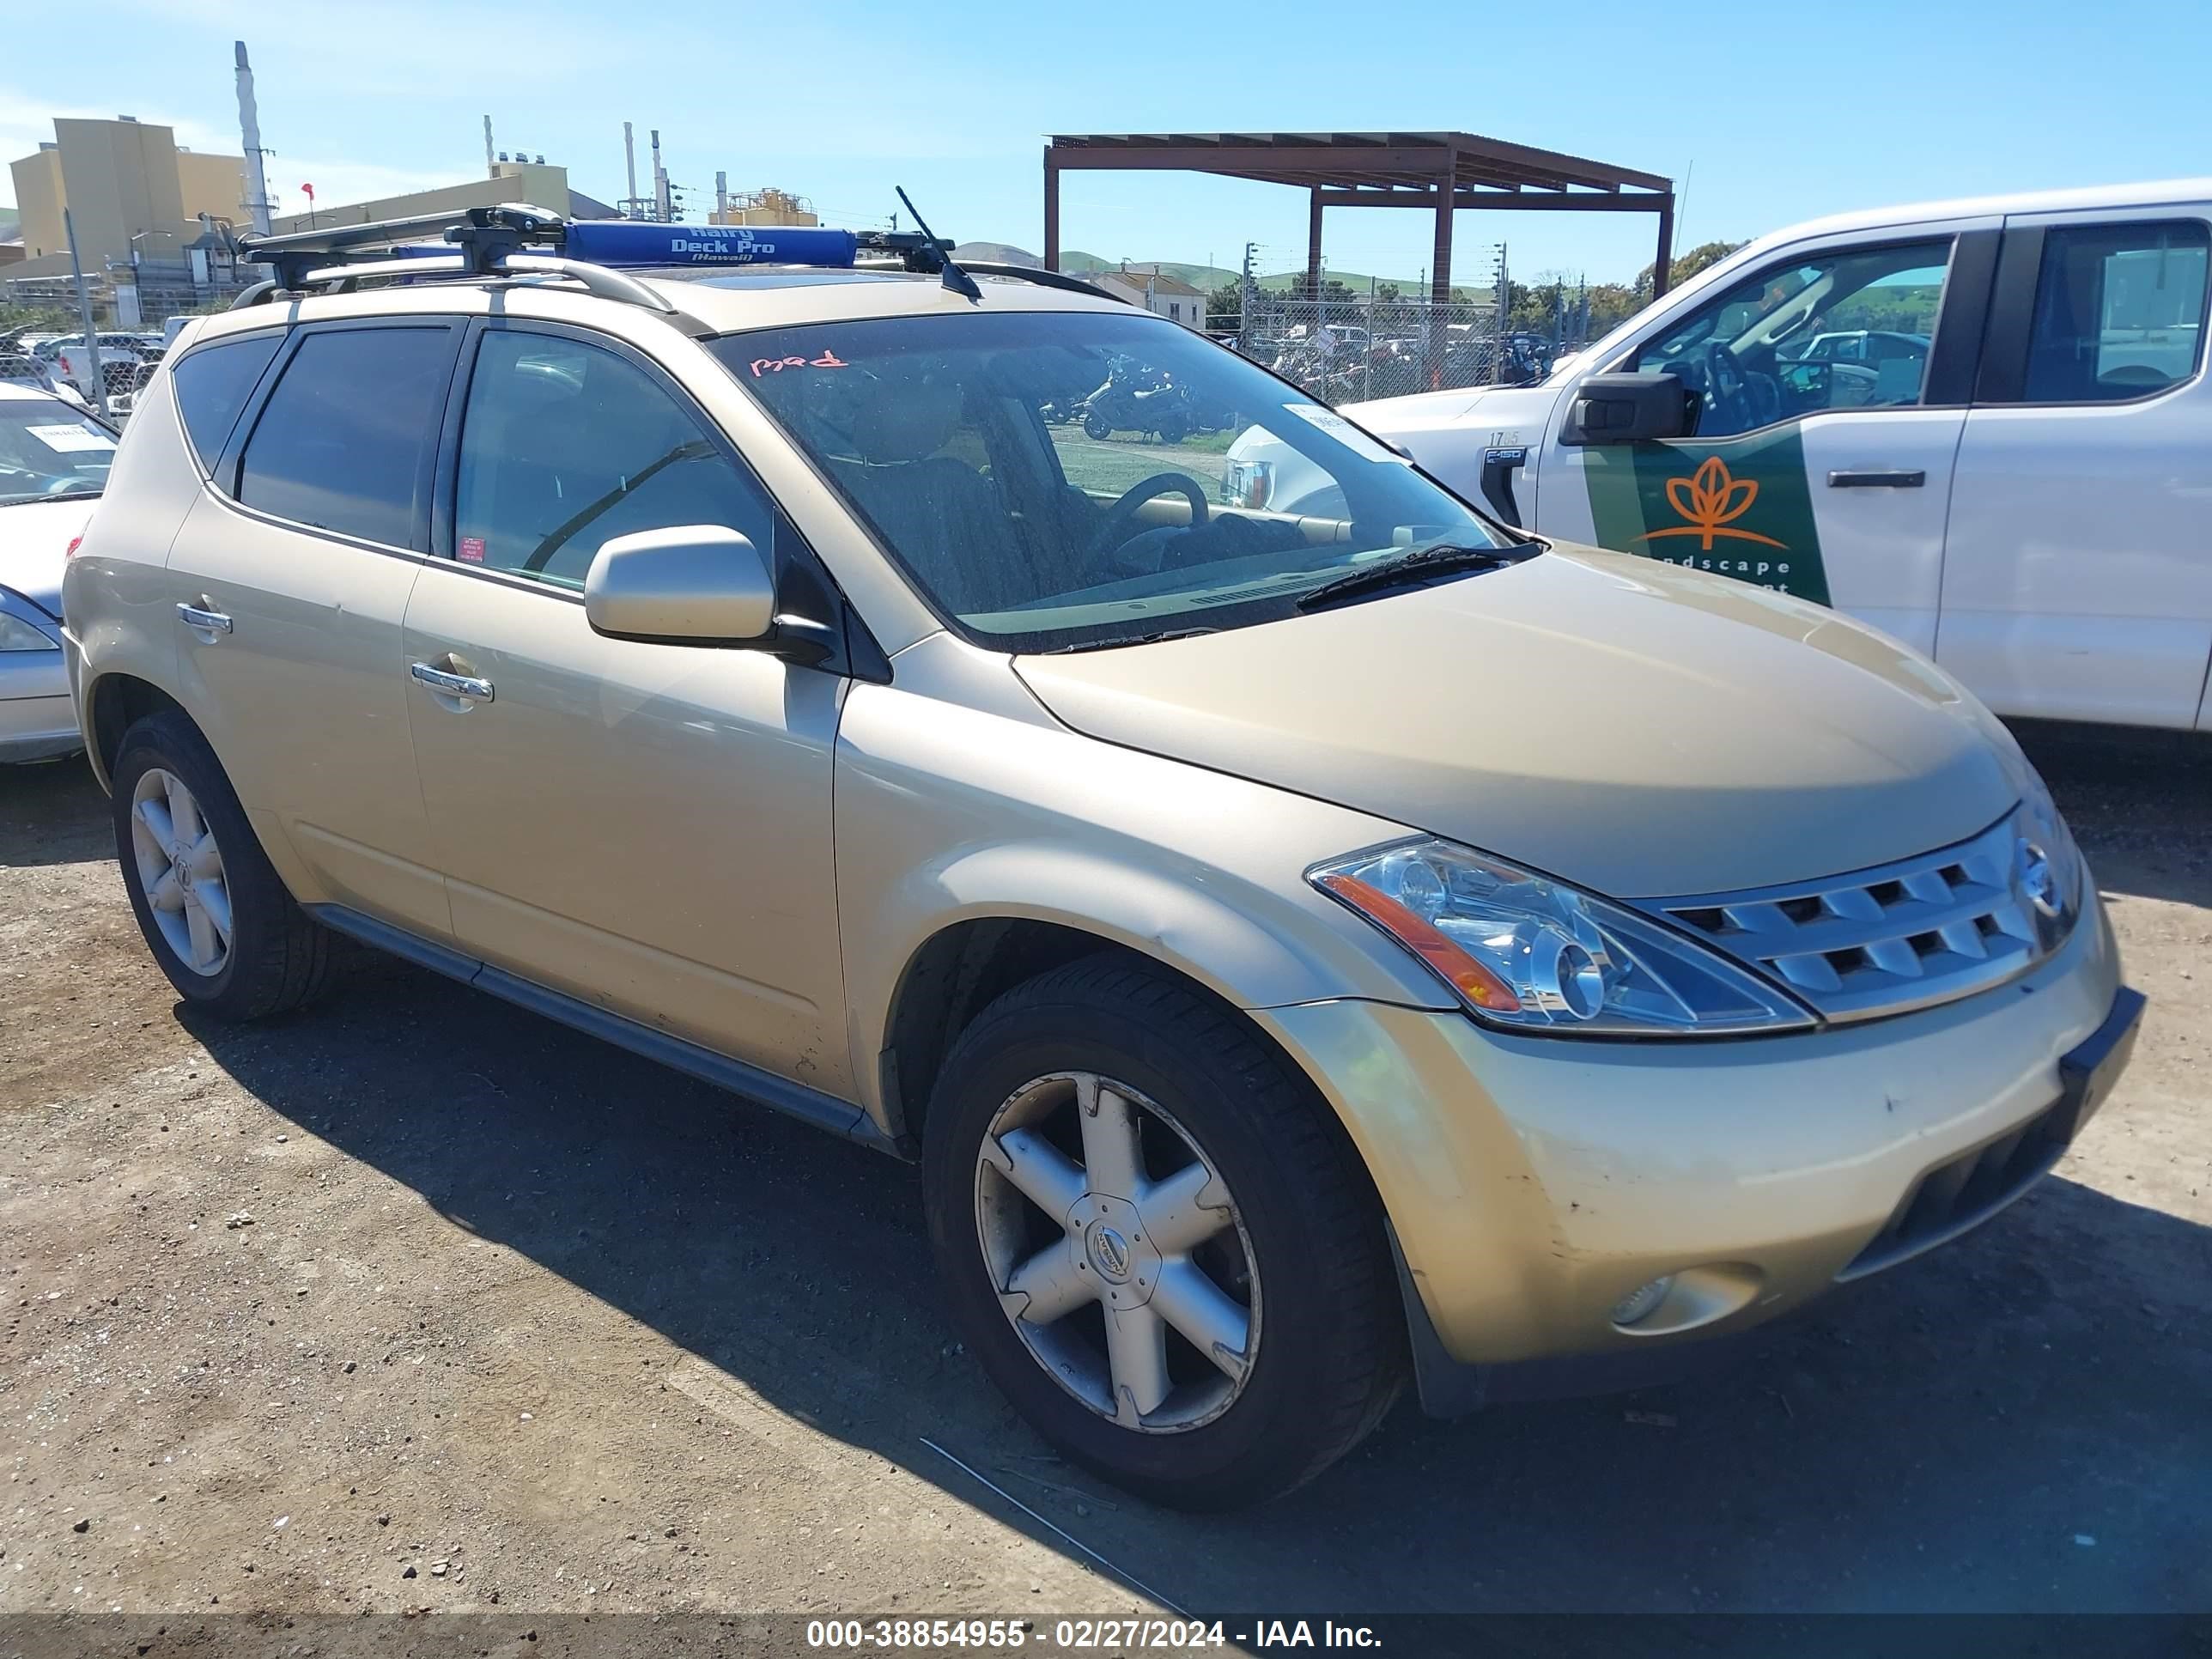 vin: JN8AZ08W63W212233 JN8AZ08W63W212233 2003 nissan murano 3500 for Sale in 94565, 2780 Willow Pass Road, Bay Point, USA